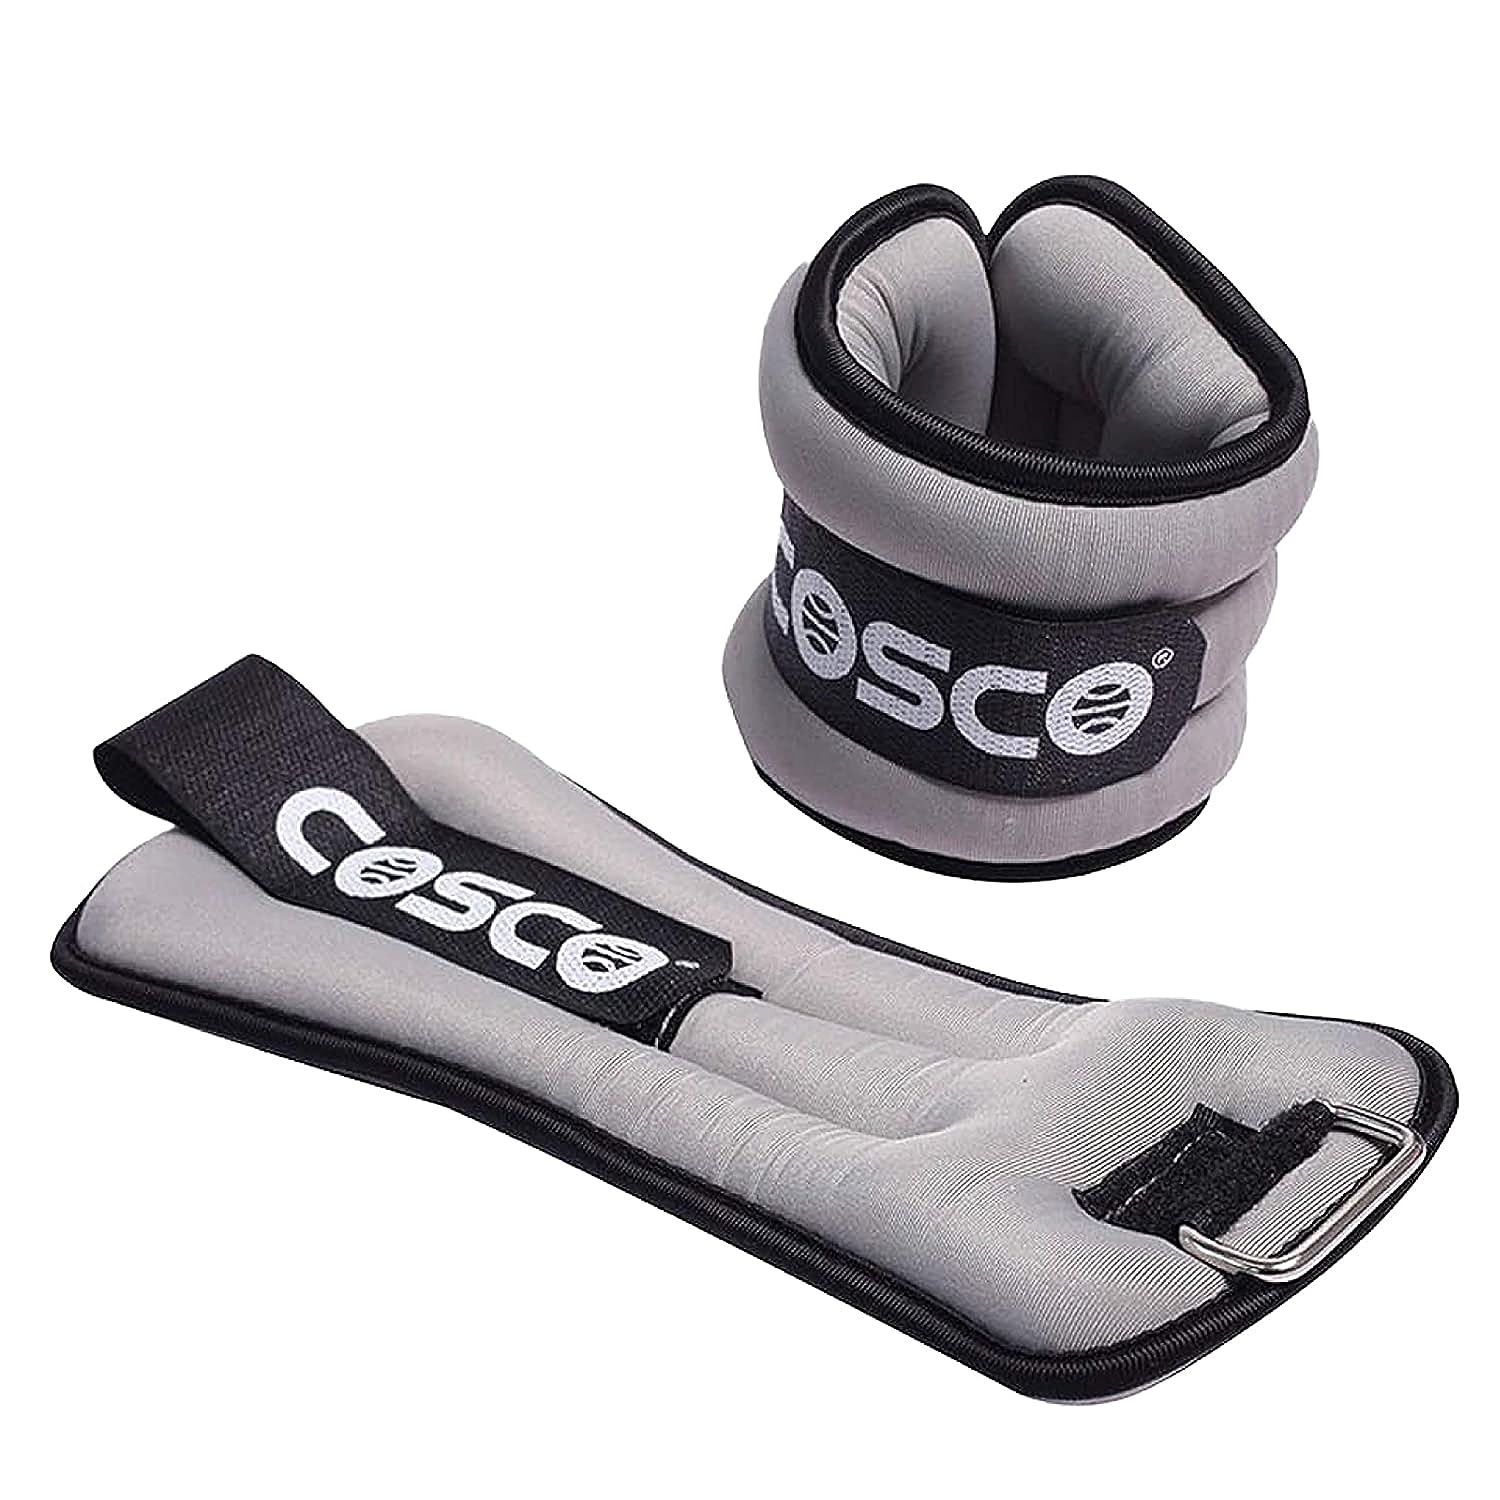 Cosco Ankle Weight (Color May Vary)